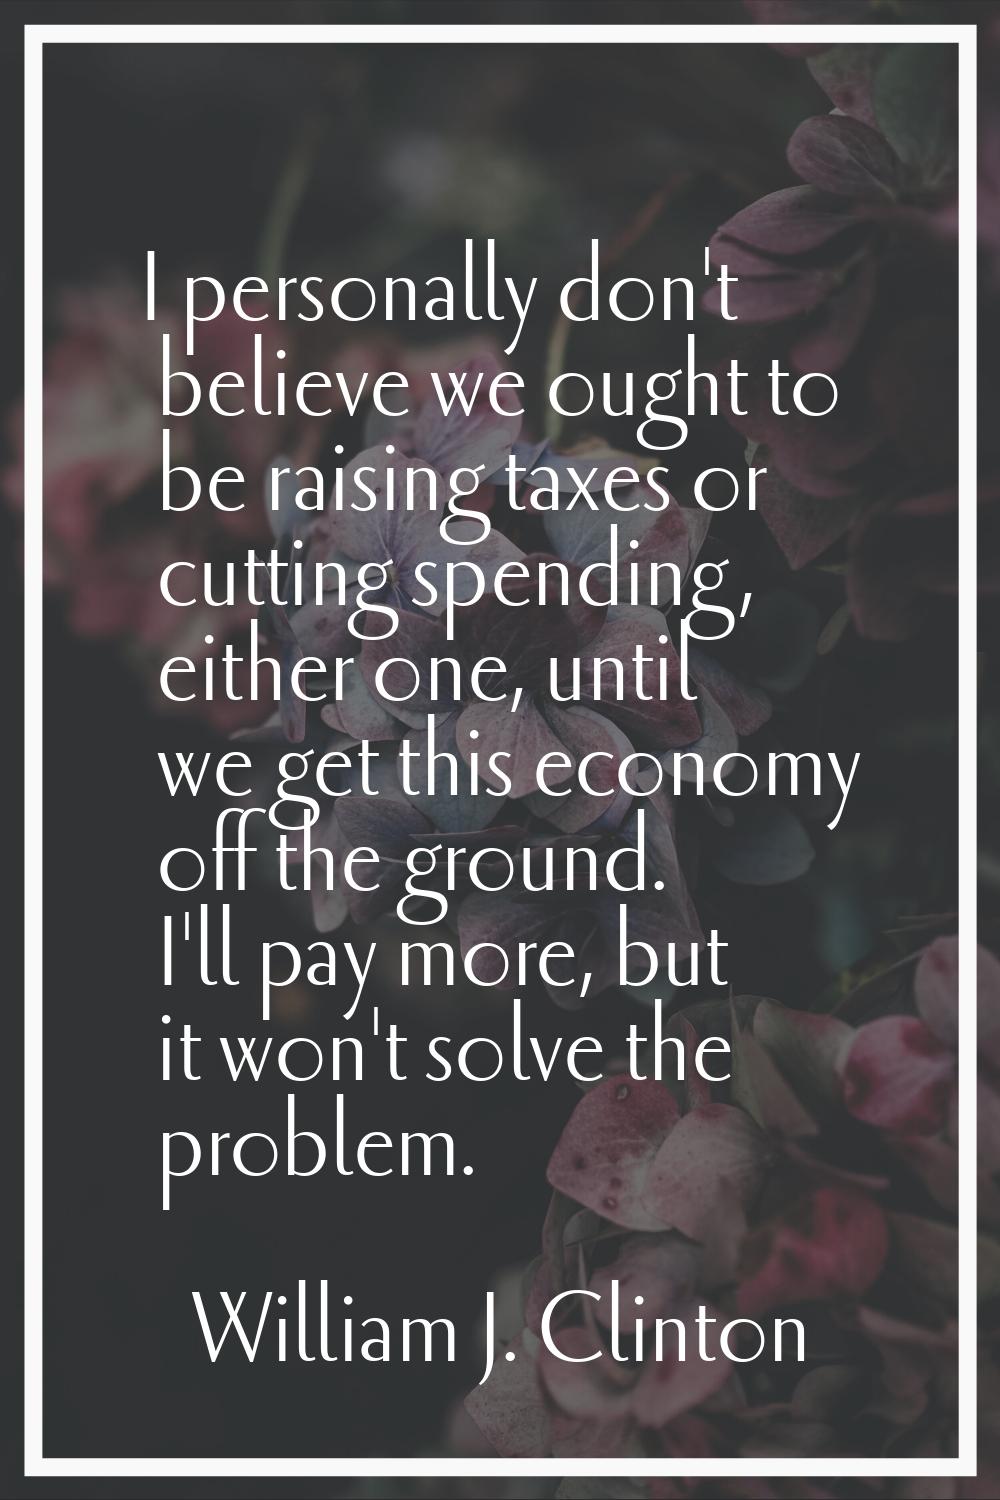 I personally don't believe we ought to be raising taxes or cutting spending, either one, until we g